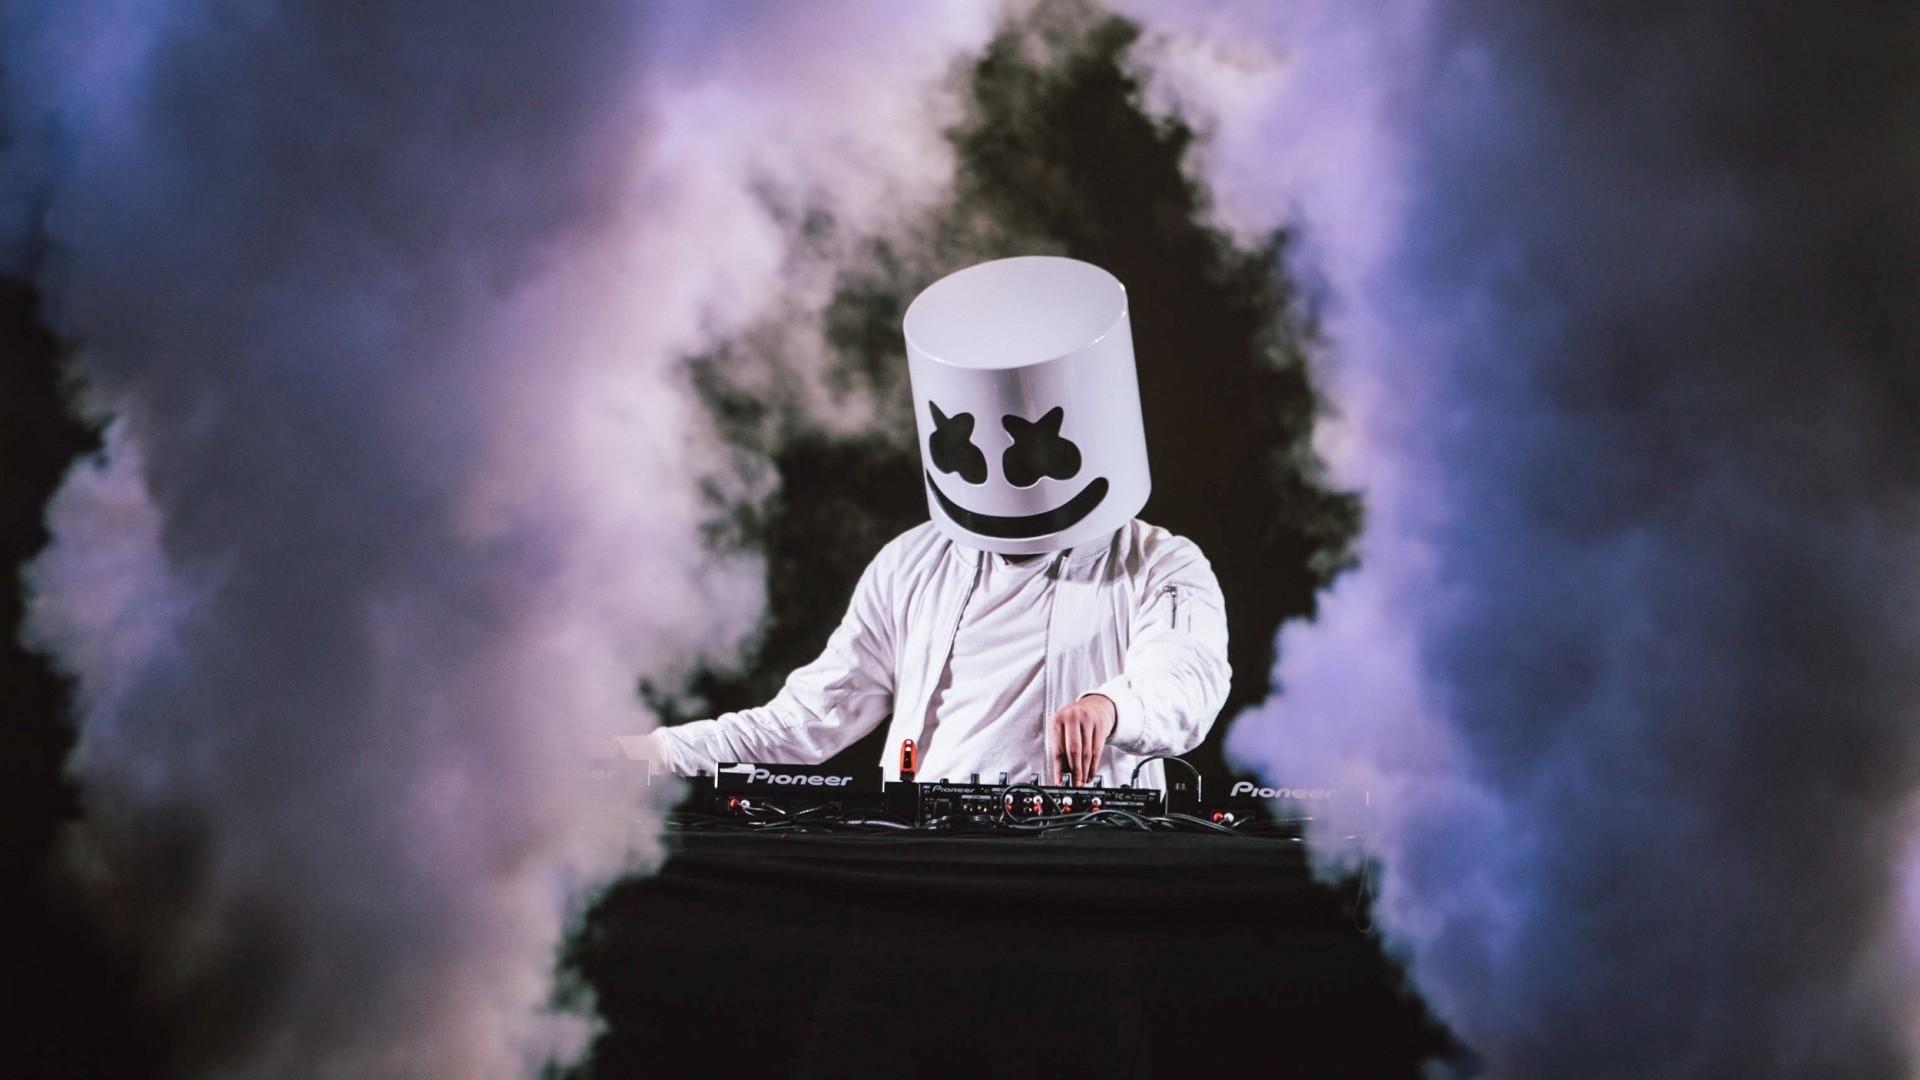 Desktop Wallpaper Marshmello With high-resolution 1920X1080 pixel. You can use this wallpaper for your Windows and Mac OS computers as well as your Android and iPhone smartphones